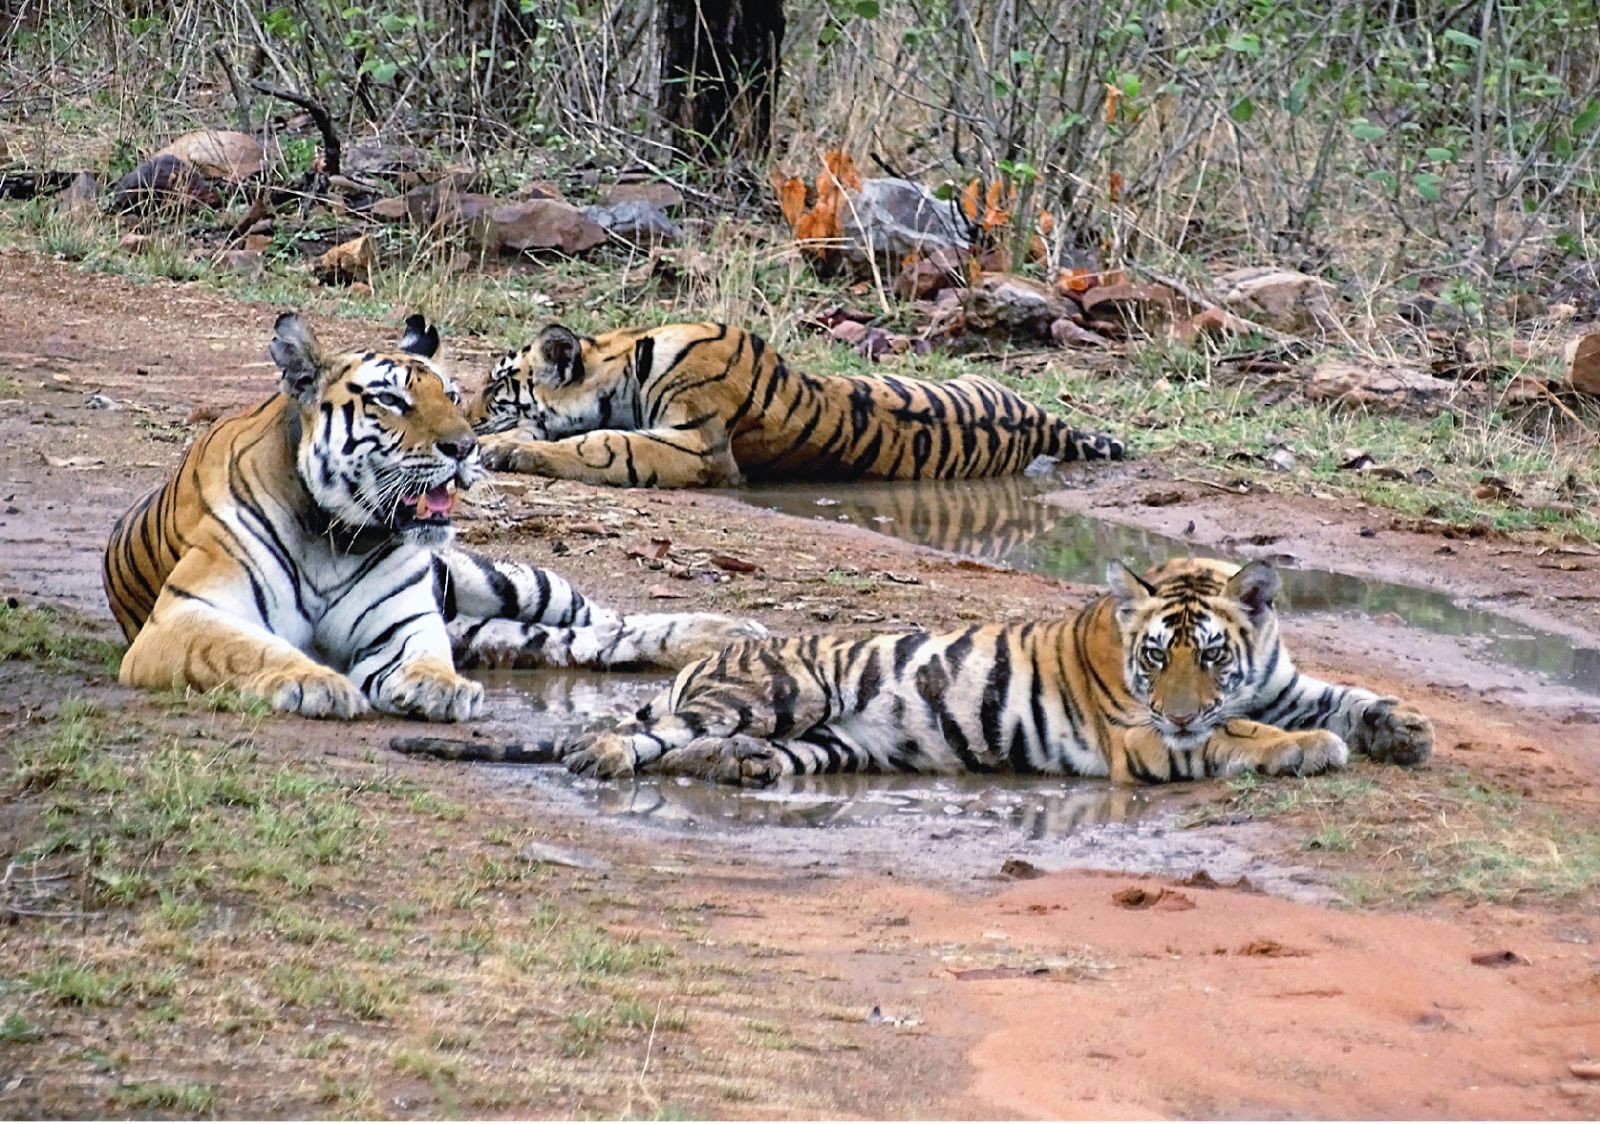 There is an urgent need to extend tiger conservation beyond the boundaries of Protected Areas, mapped at the beginning of Project Tiger. Protecting tiger corridors to enable dispersal and interbreeding for a viable gene pool diversity is vital to the survival of tigers in India.